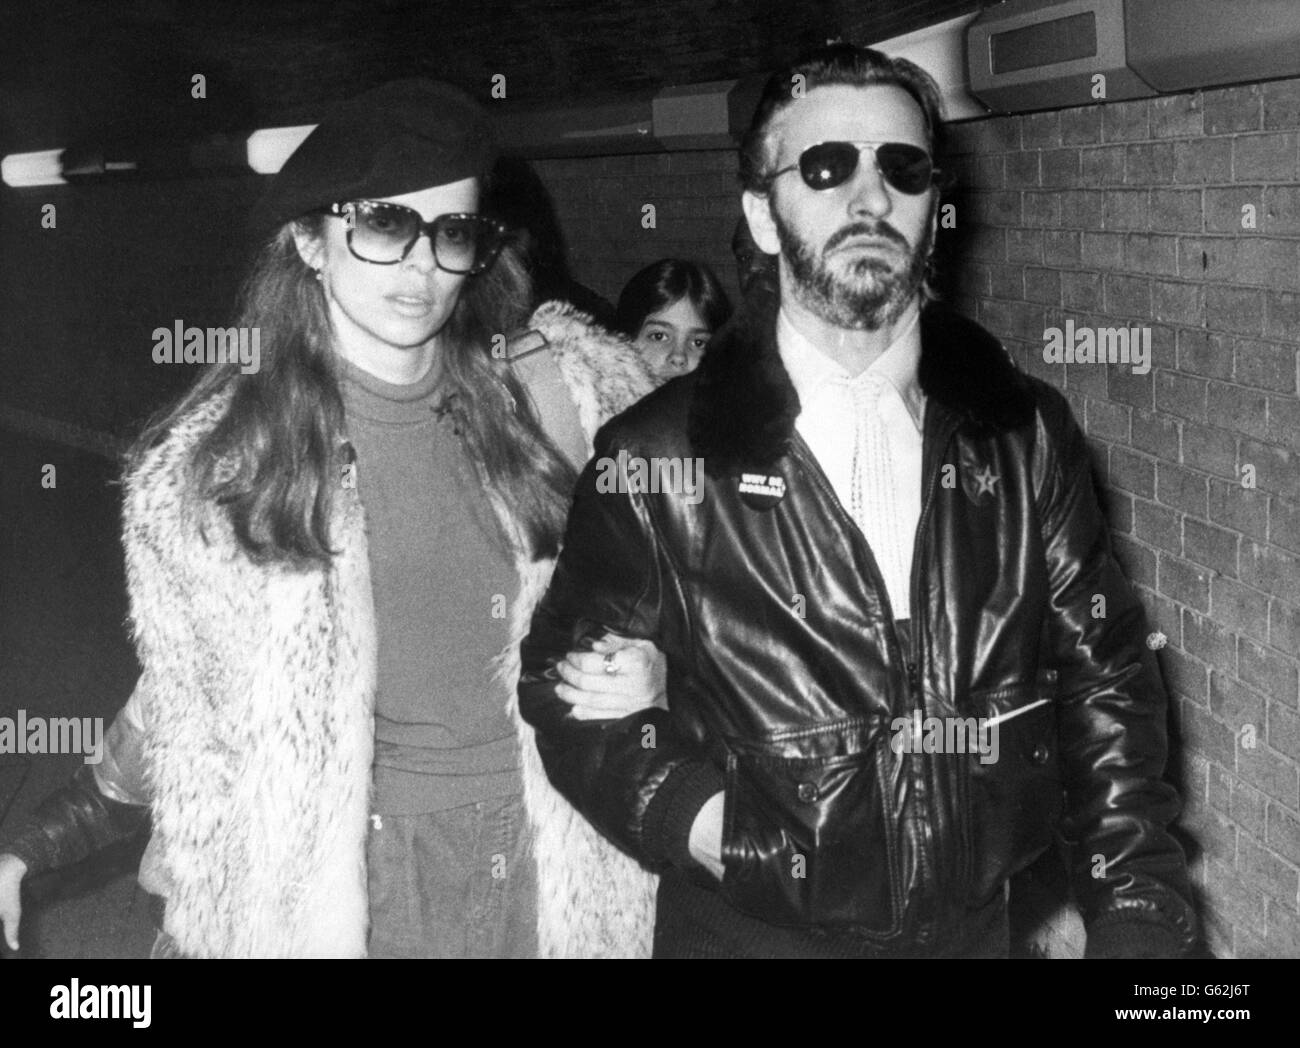 Former Beatles drummer Ringo Starr and his girlfriend Barbara Bach arrive at Heathrow Airport in London after flying in from Los Angeles. Stock Photo